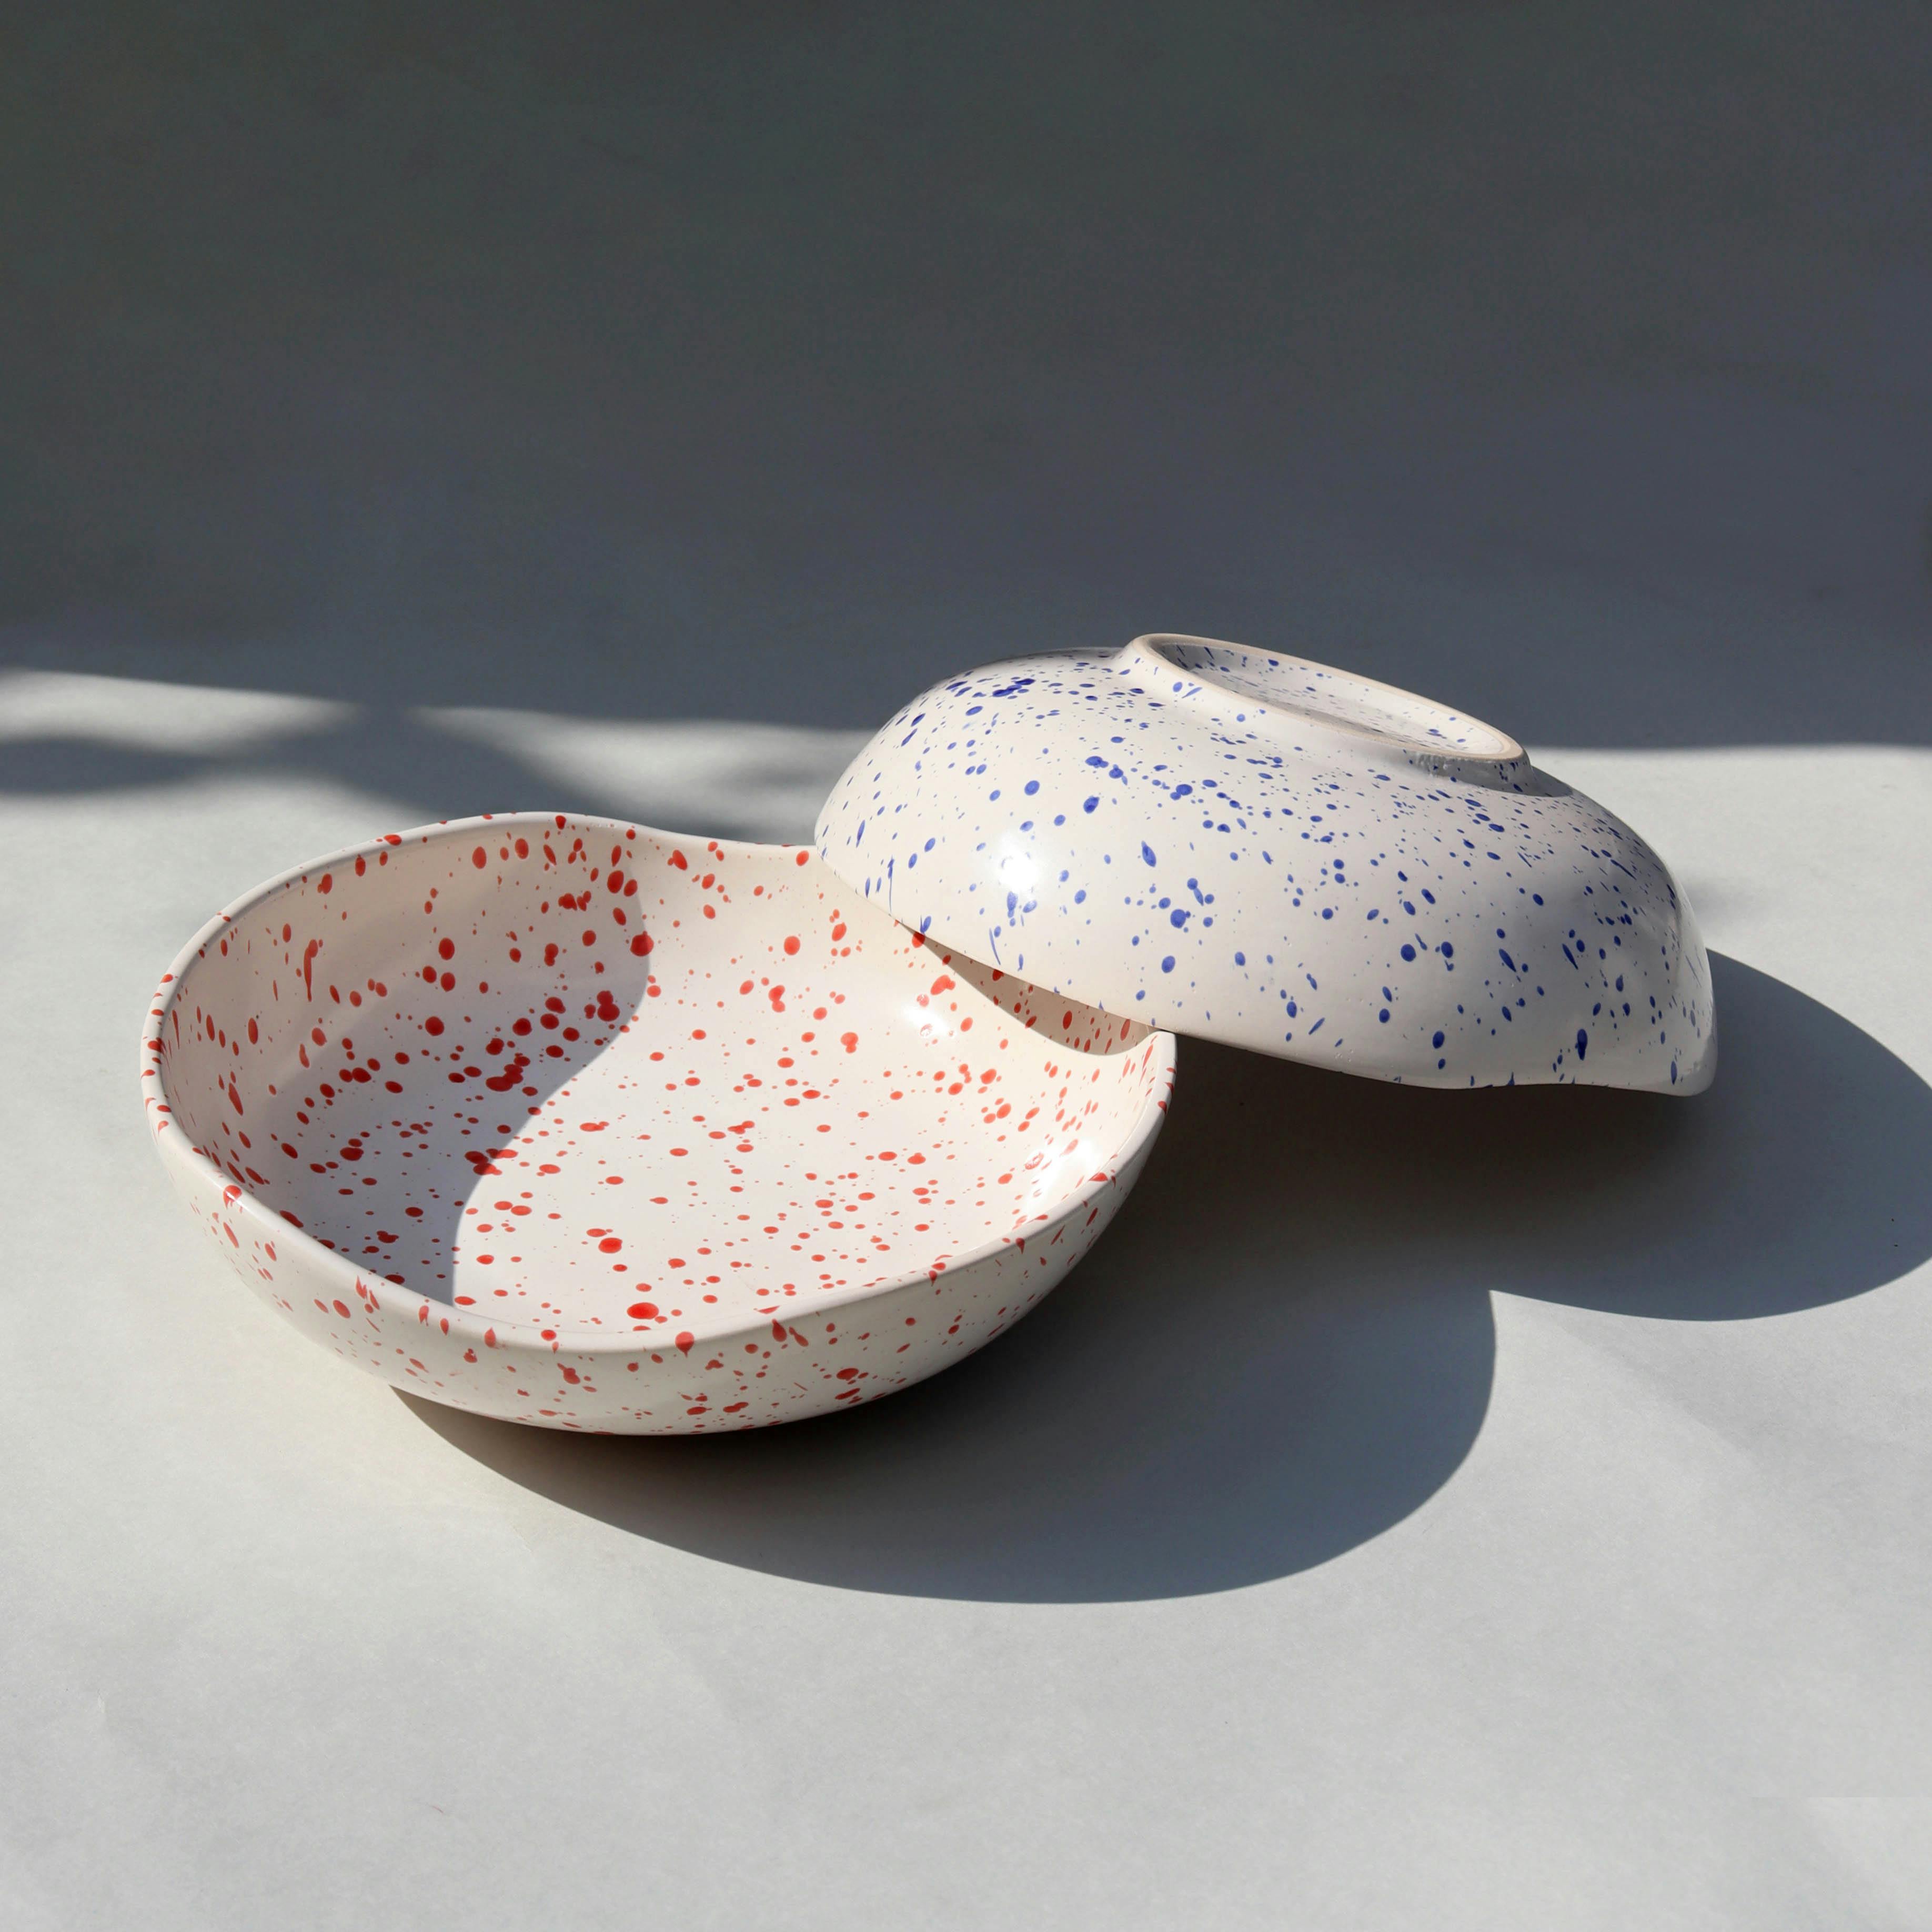 Speckled Ceramic Bowl, a product by Hello December